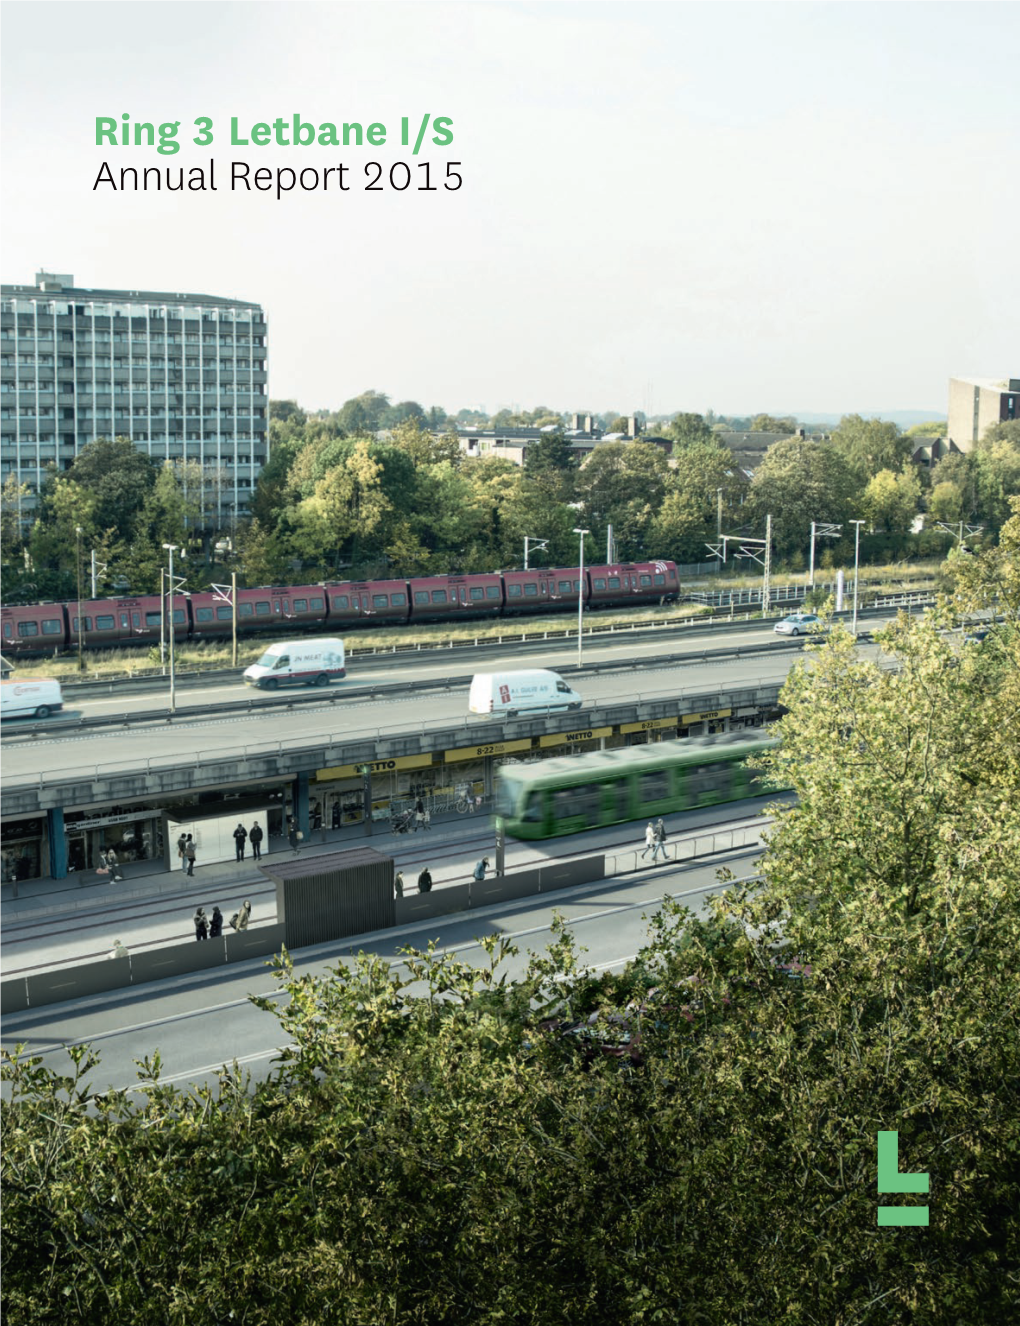 Ring 3 Letbane I/S Annual Report 2015